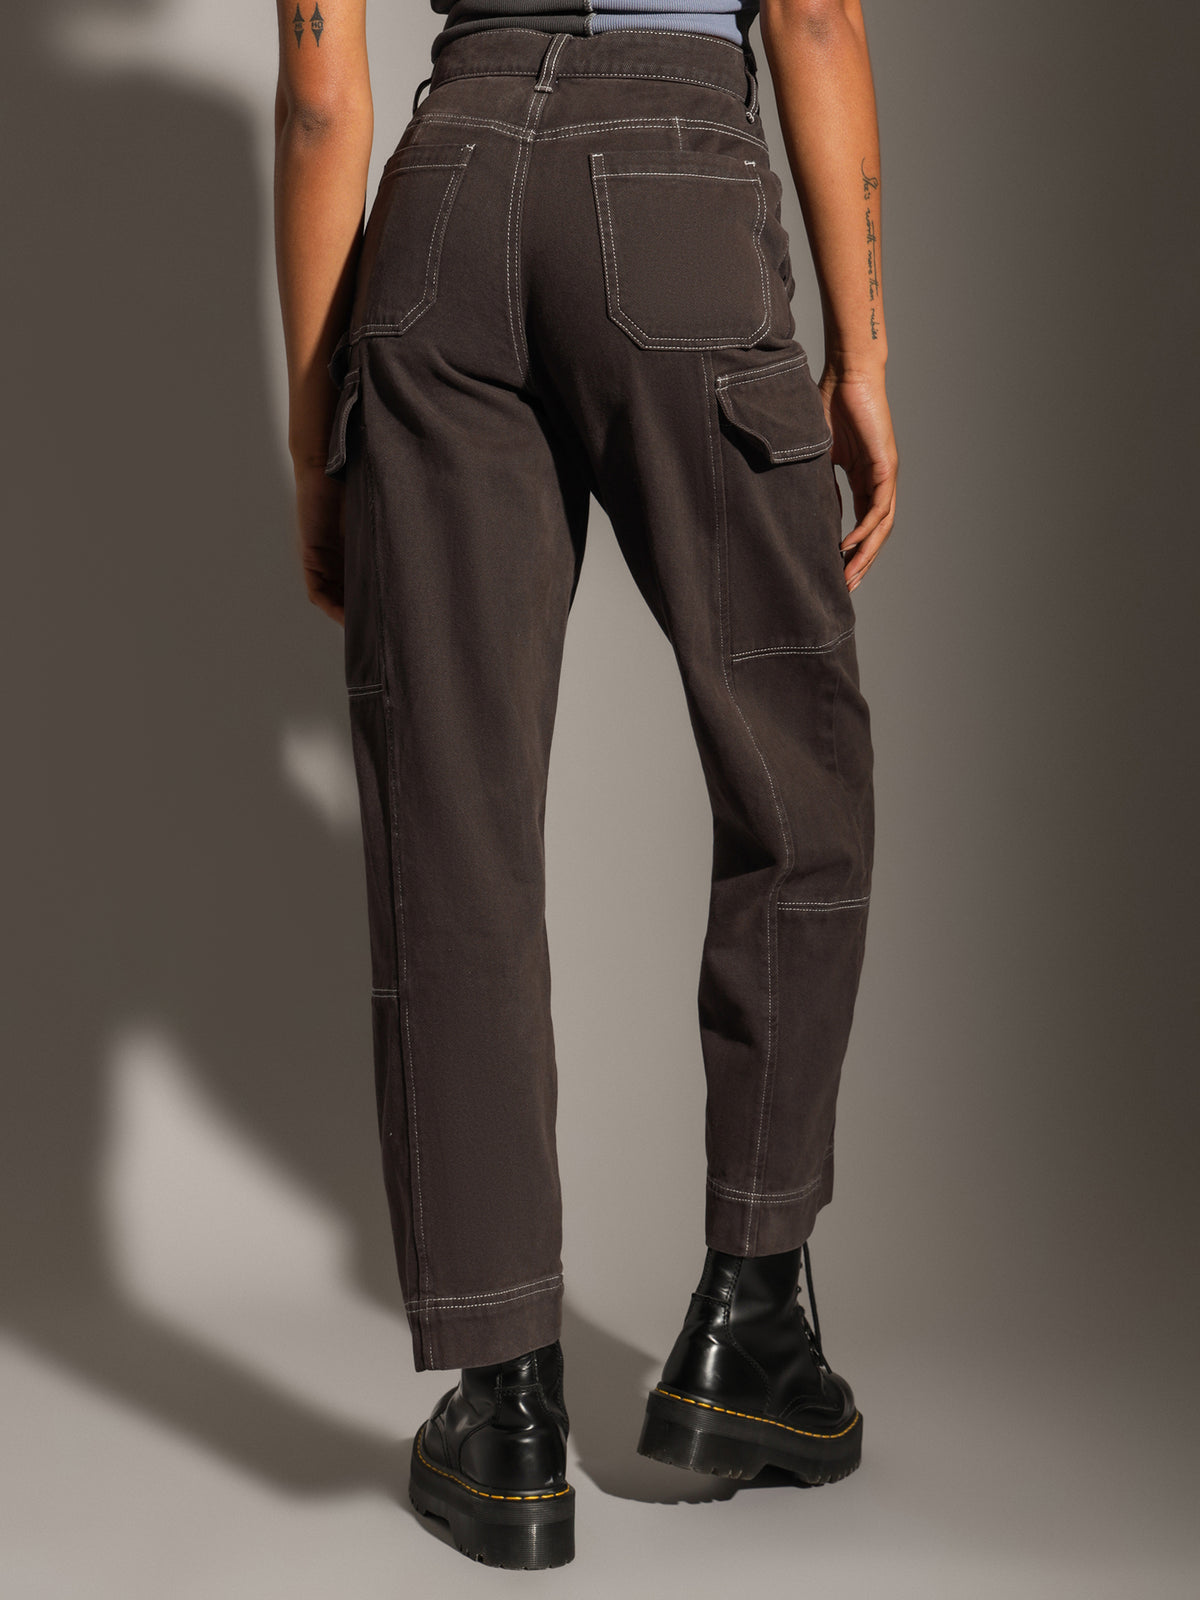 Ivy Cargo Pants in Washed Black